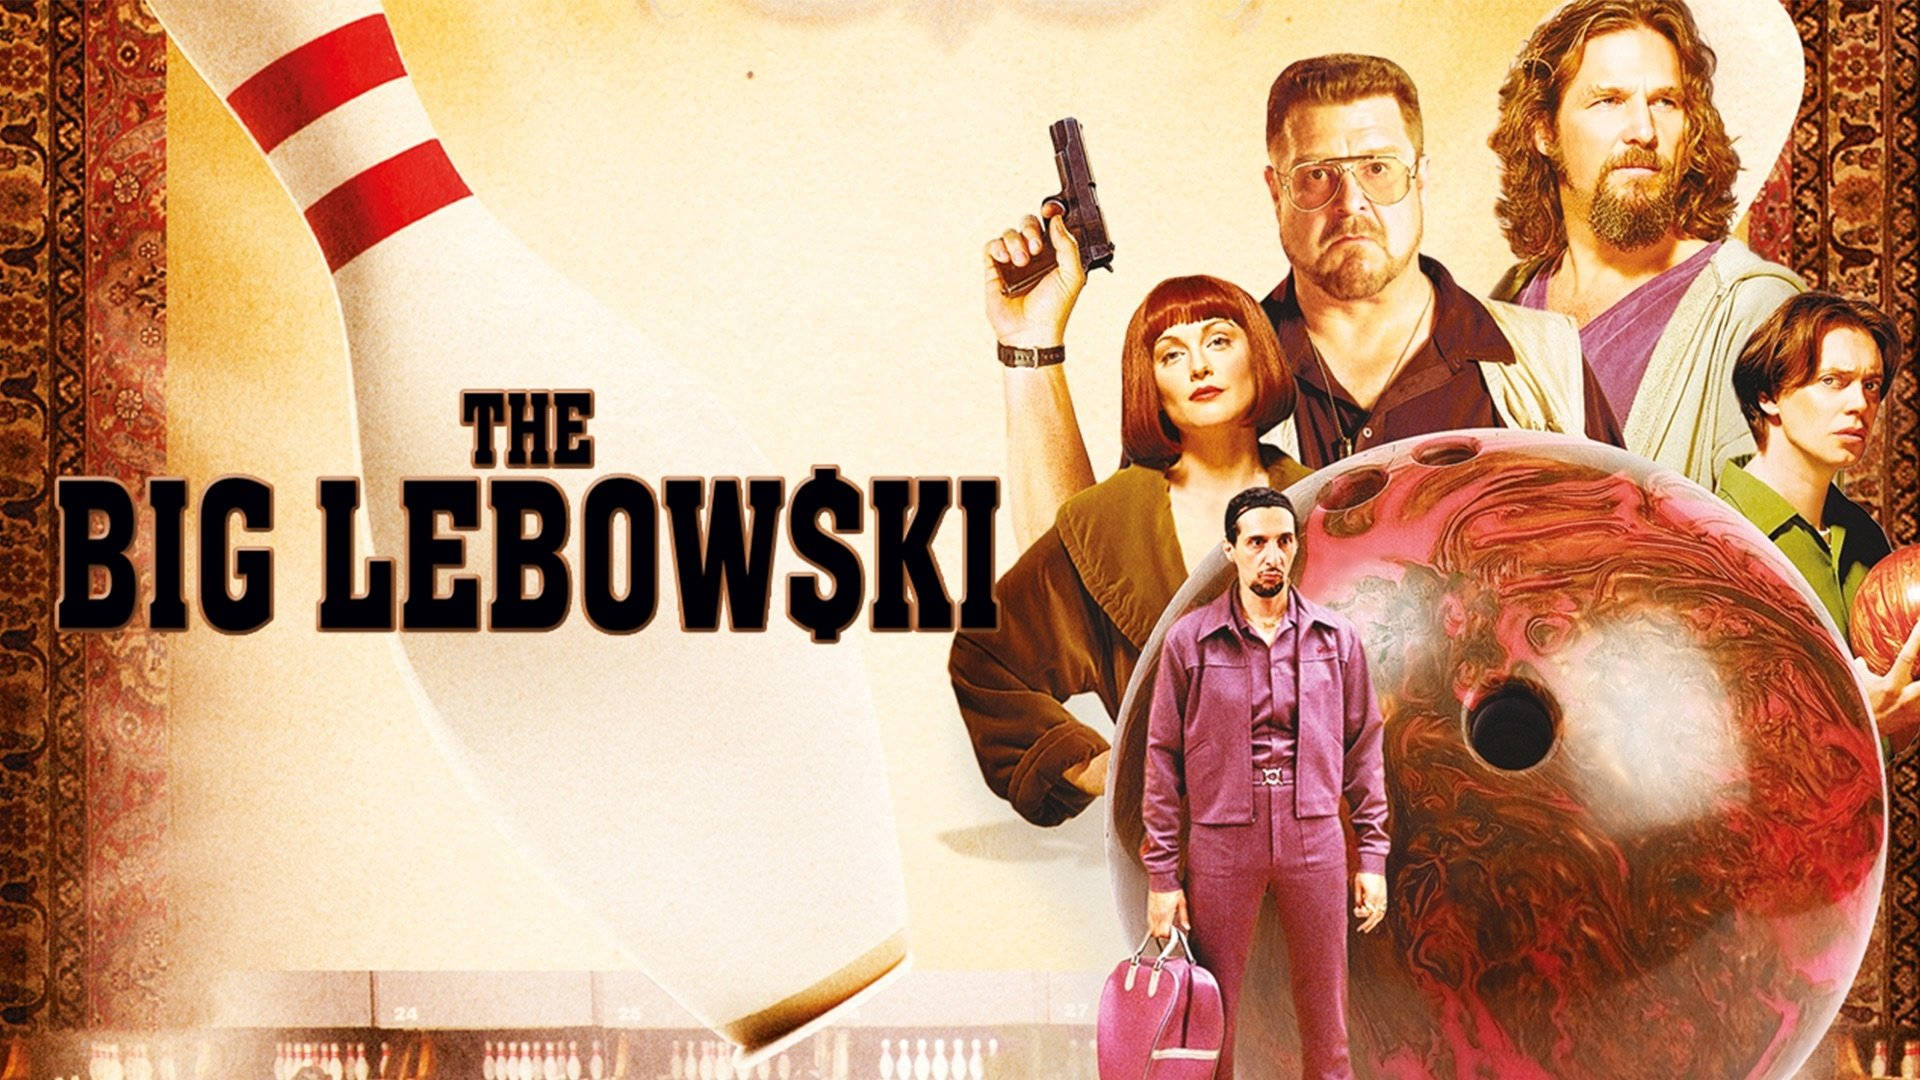 Iconic movie poster of The Big Lebowski featuring main characters. Wallpaper